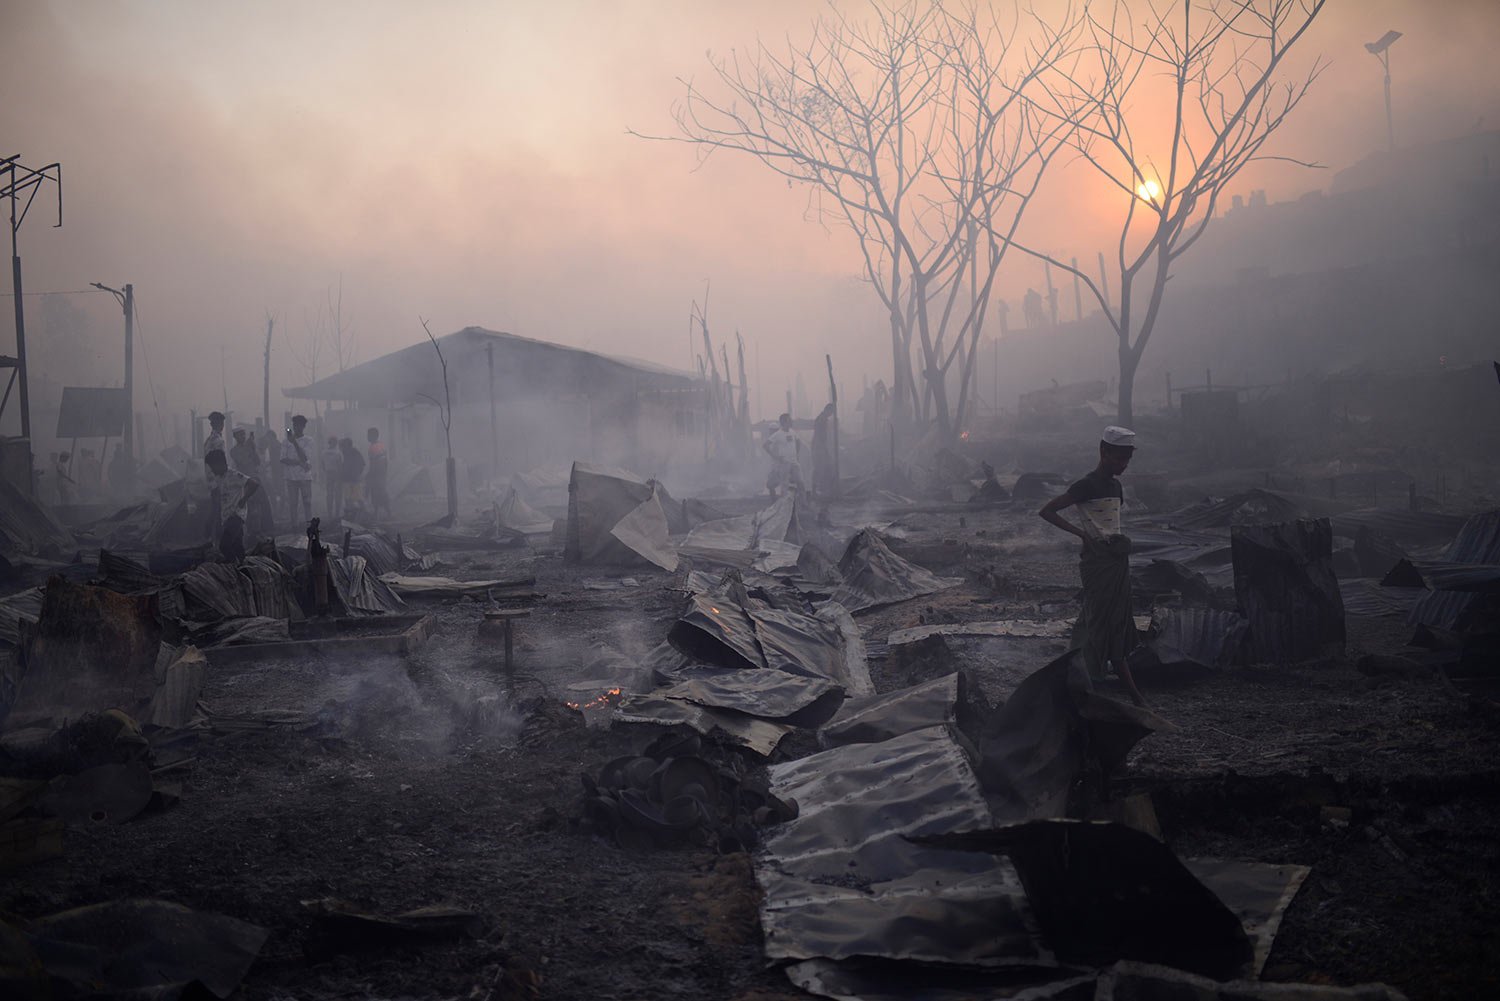  Rohingya refugees try to salvage their belongings after a major fire in their Balukhali camp at Ukhiya in Cox's Bazar district, Bangladesh, Sunday, March 5, 2023.  (AP Photo/Mahmud Hossain Opu) 